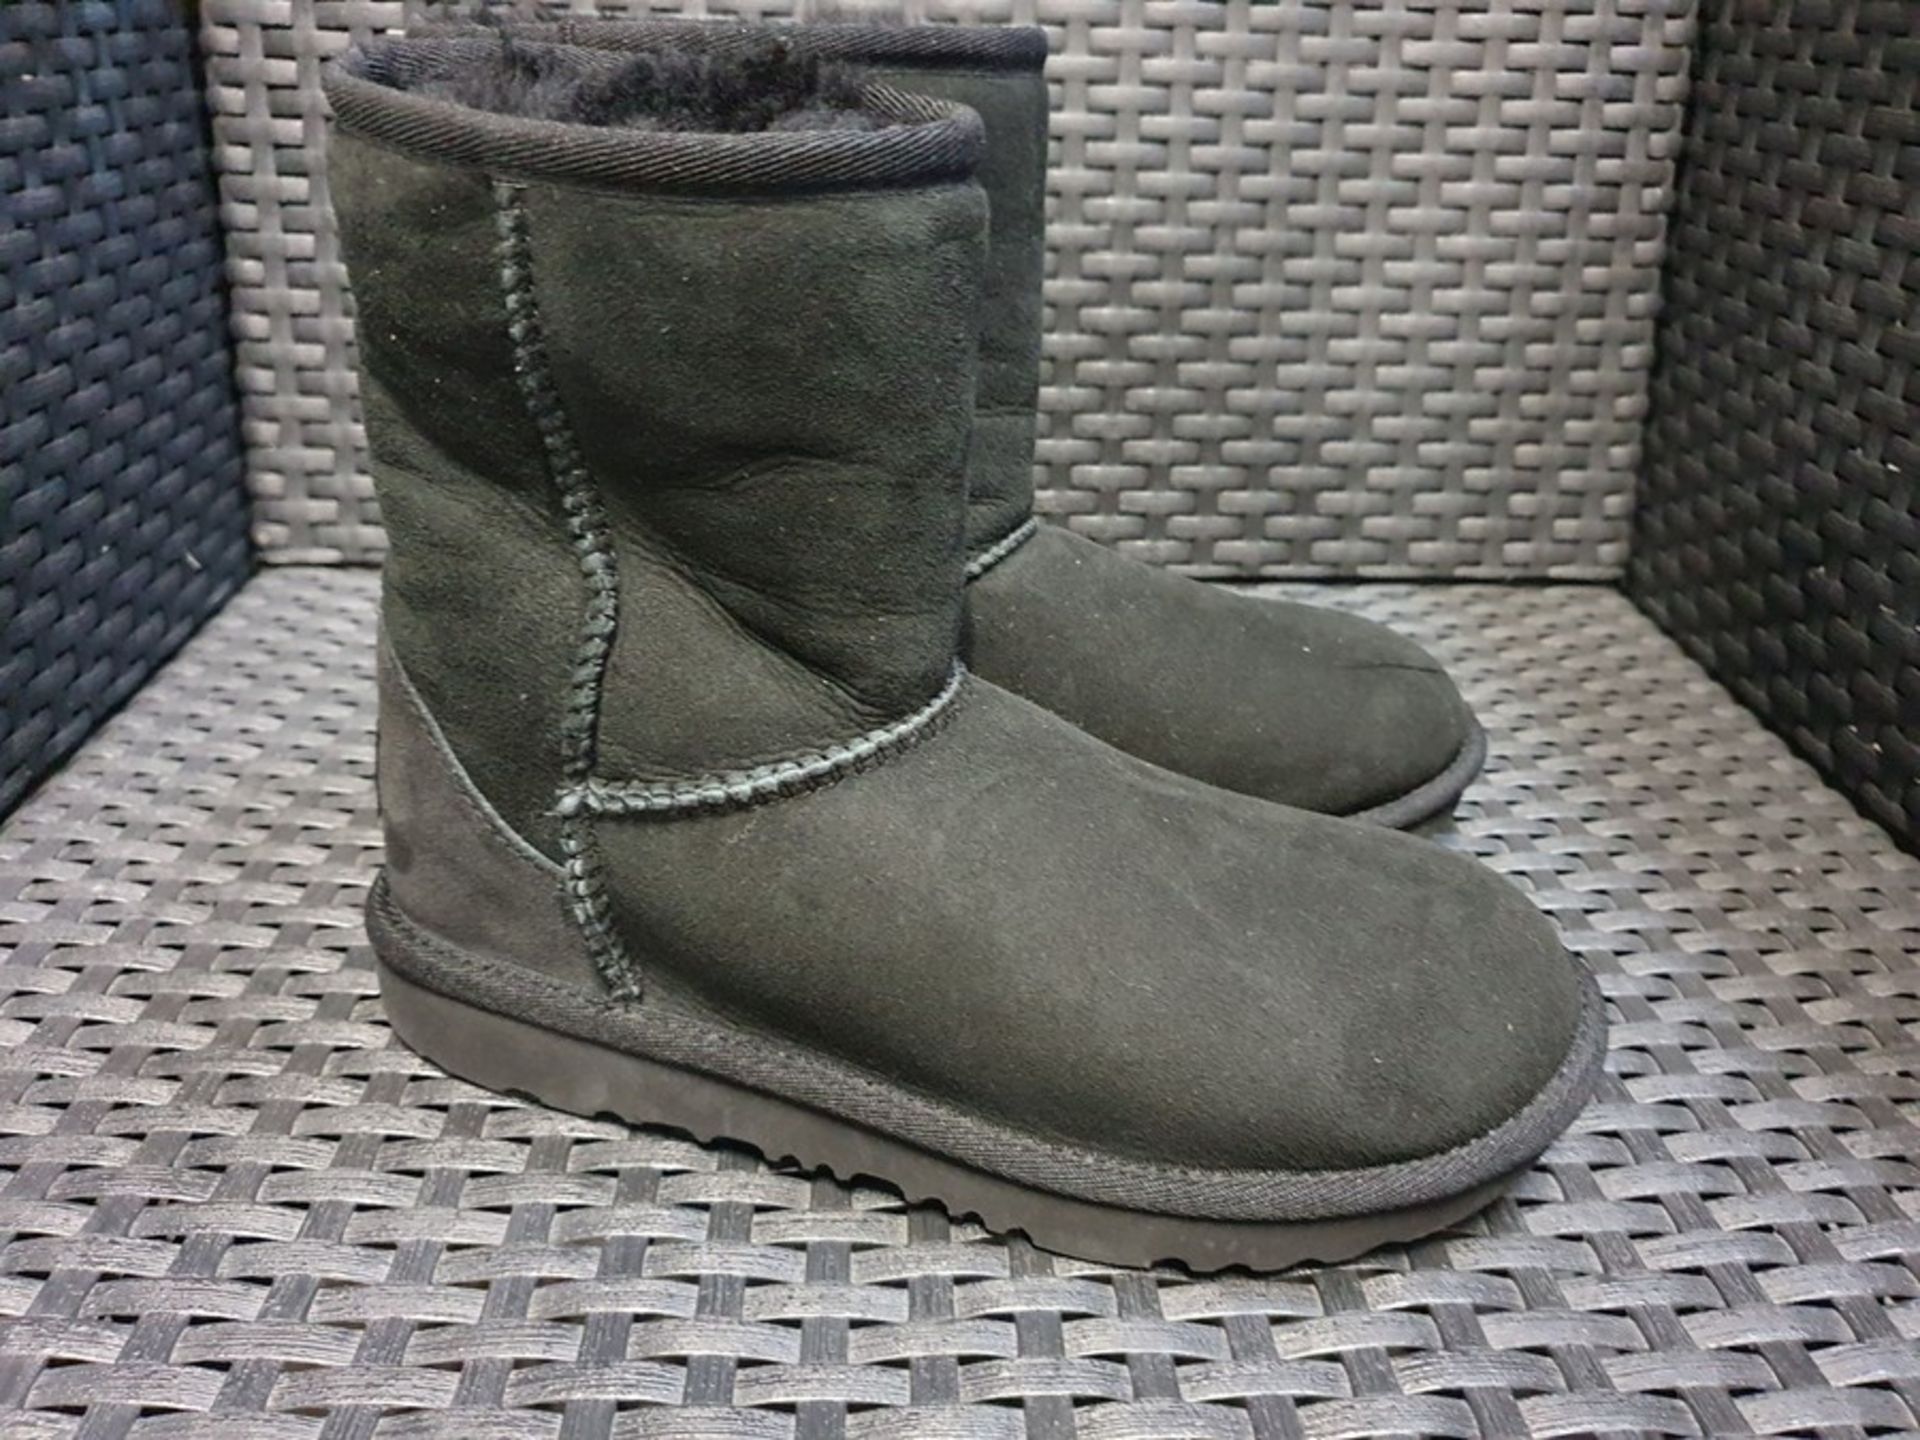 ONE PAIR OF UGG CLASSIC II SUEDE BOOTS WITH FAUX FUR LINING IN BLACK - SIZE UK 2. RRP £145.00. GRADE